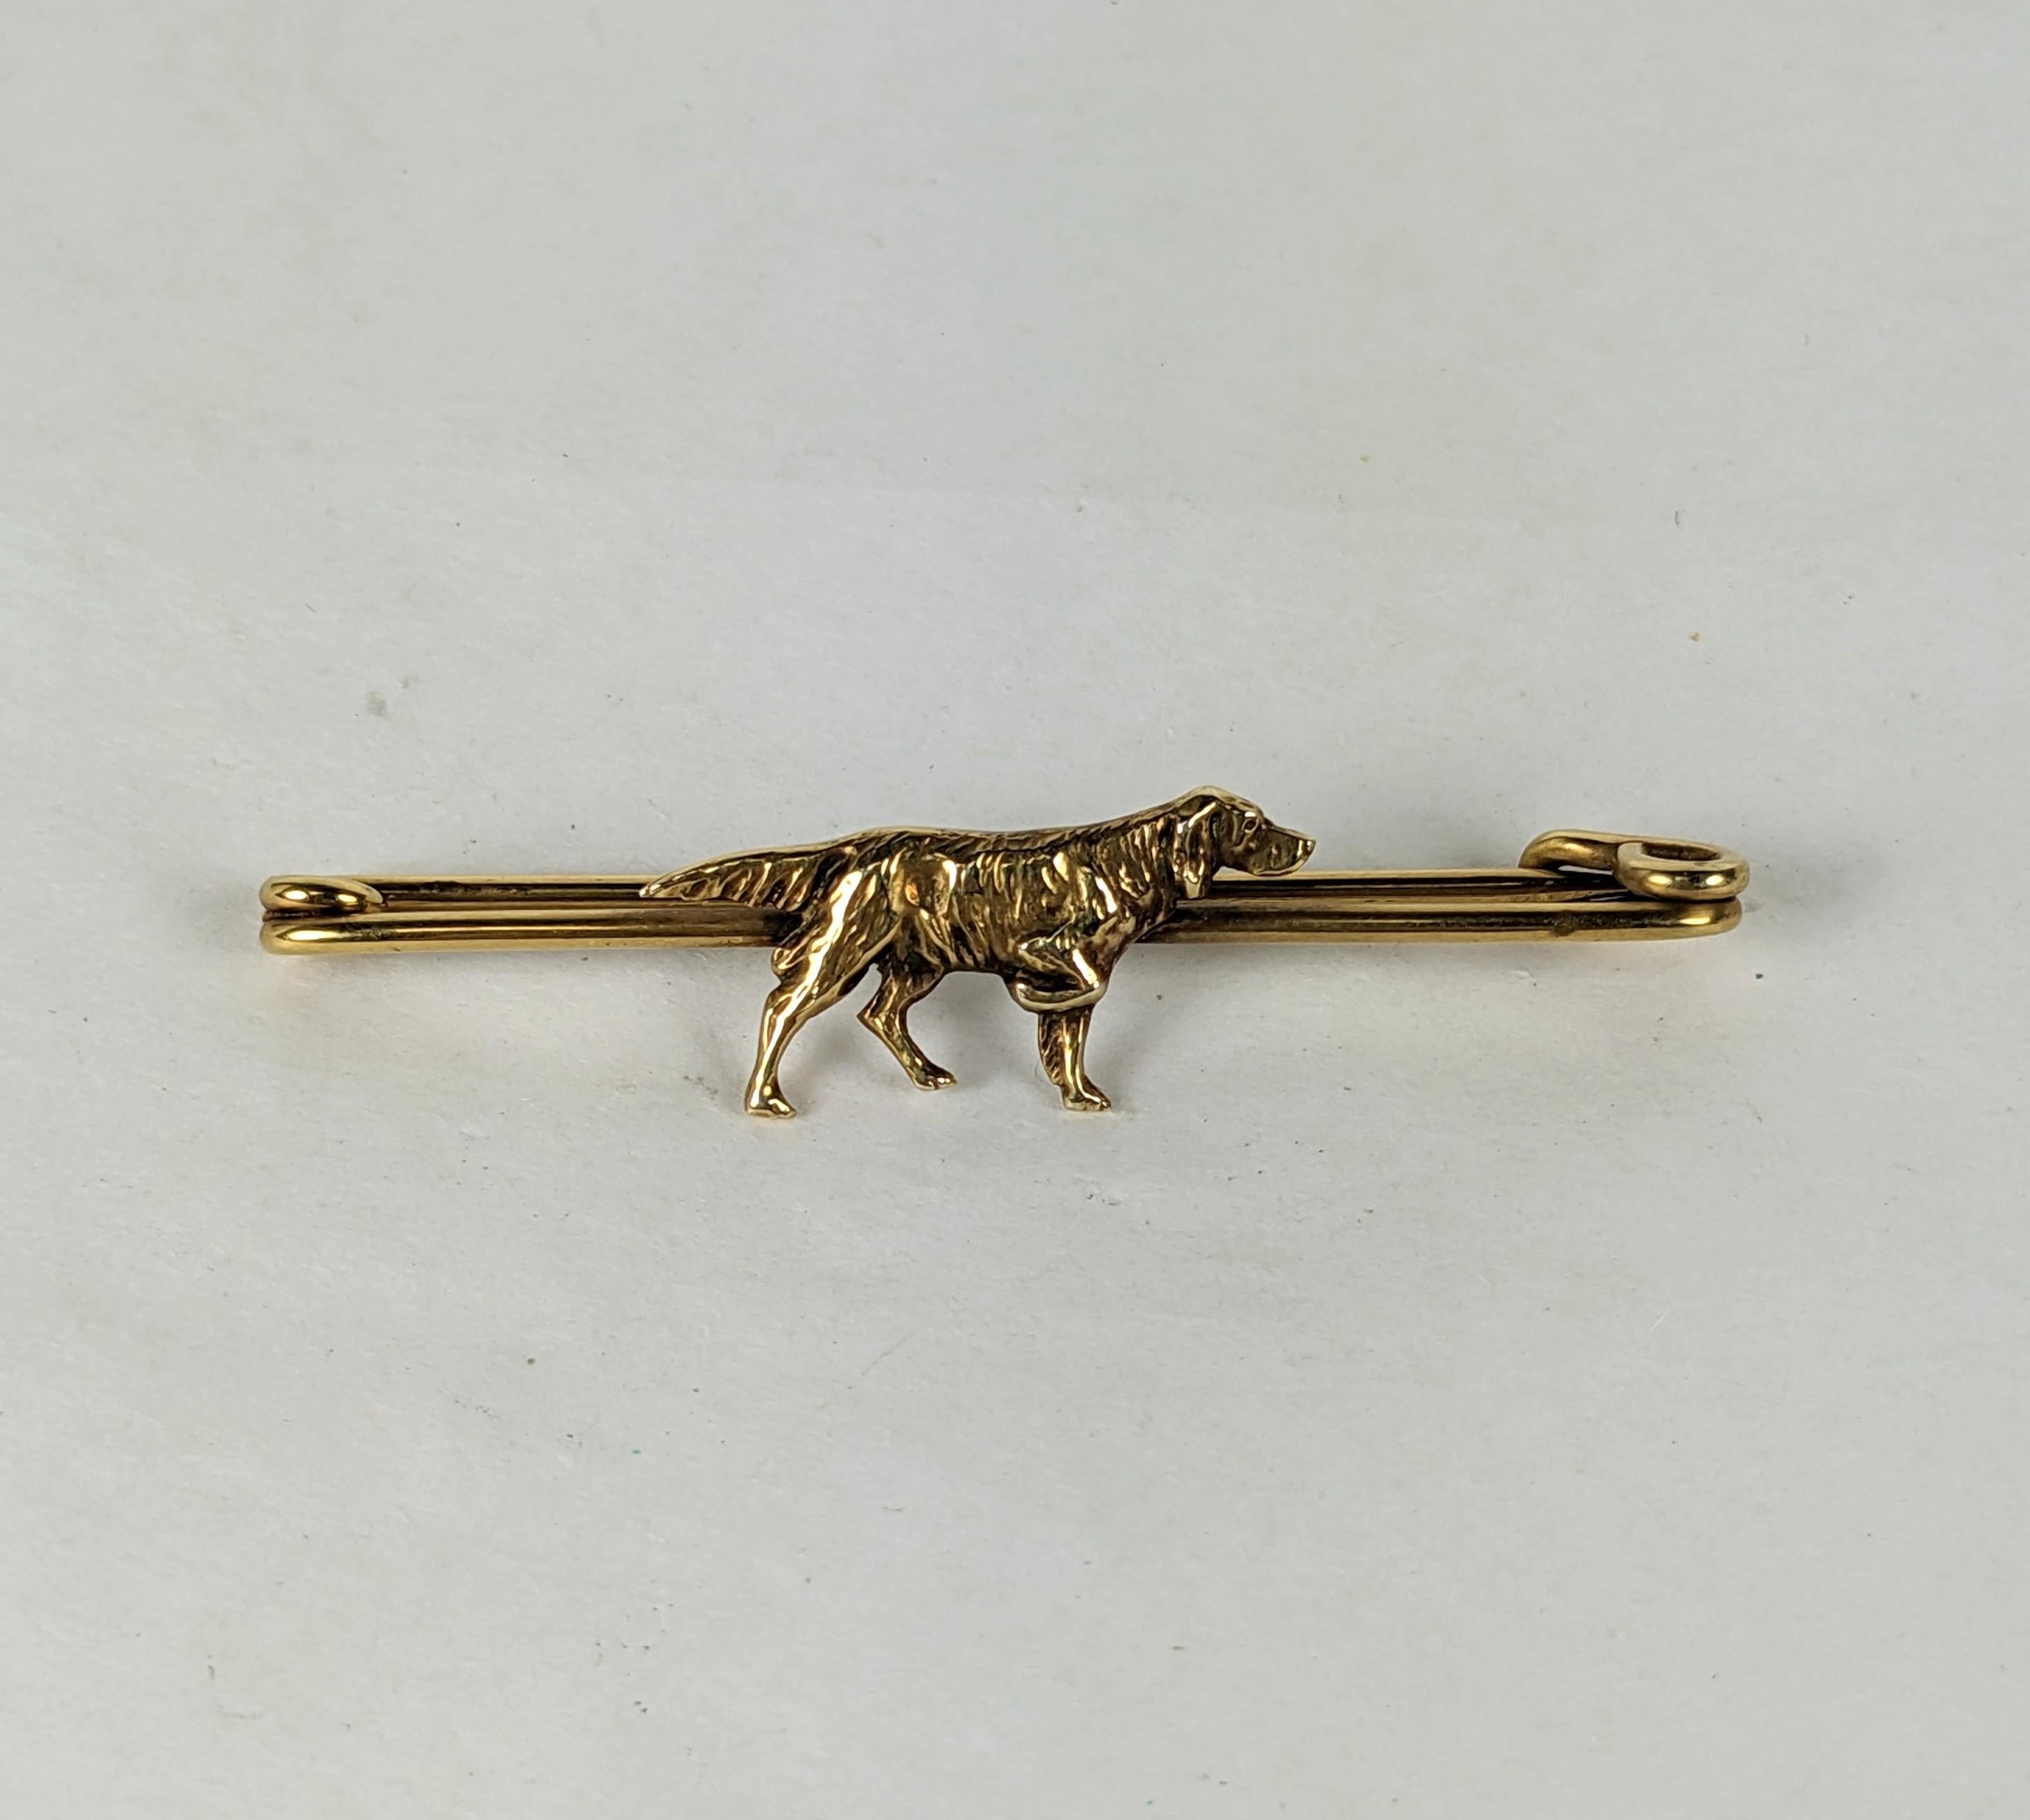 Attractive Art Deco 14k Pointer Dog Brooch designed to fasten a scarf or tie. Detailed pointer dog in stance on large safety pin style brooch. 14k tested. 1930's USA. 
2.5